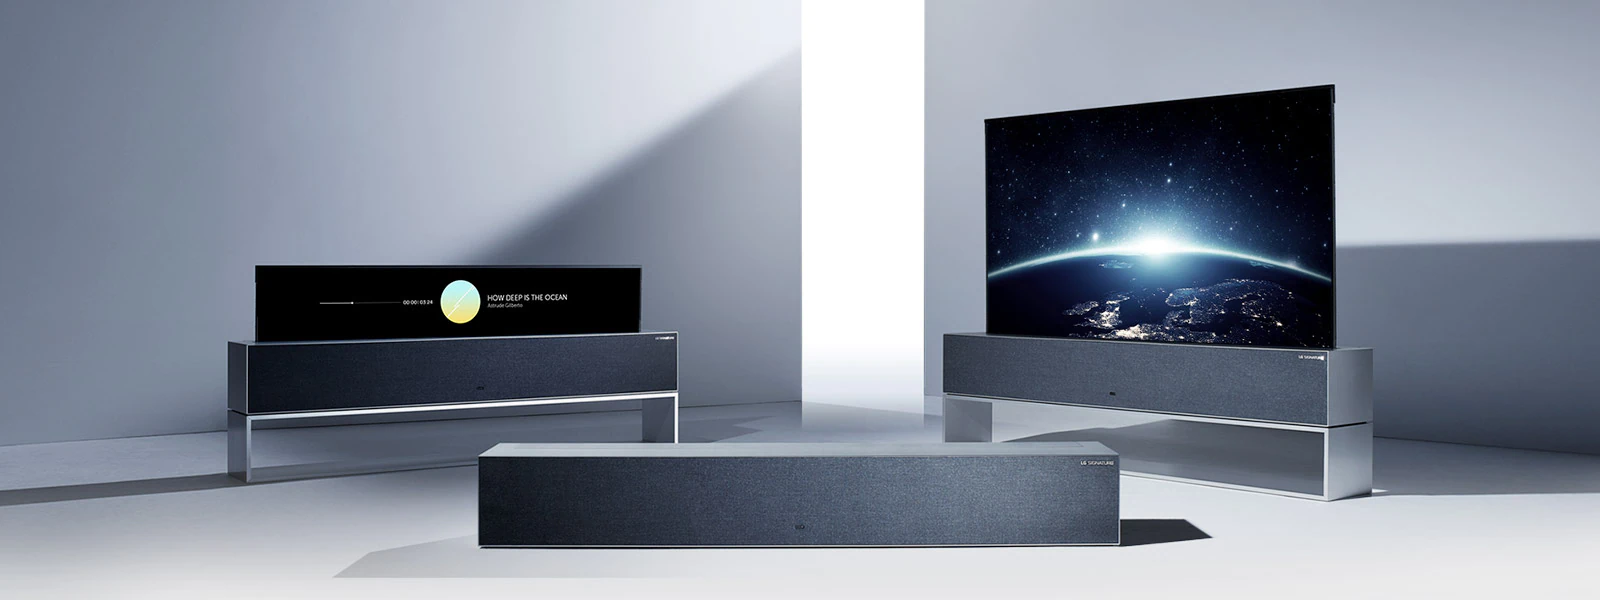 lg-signature-product-rollable-oled-tv-r1-view-mode-w